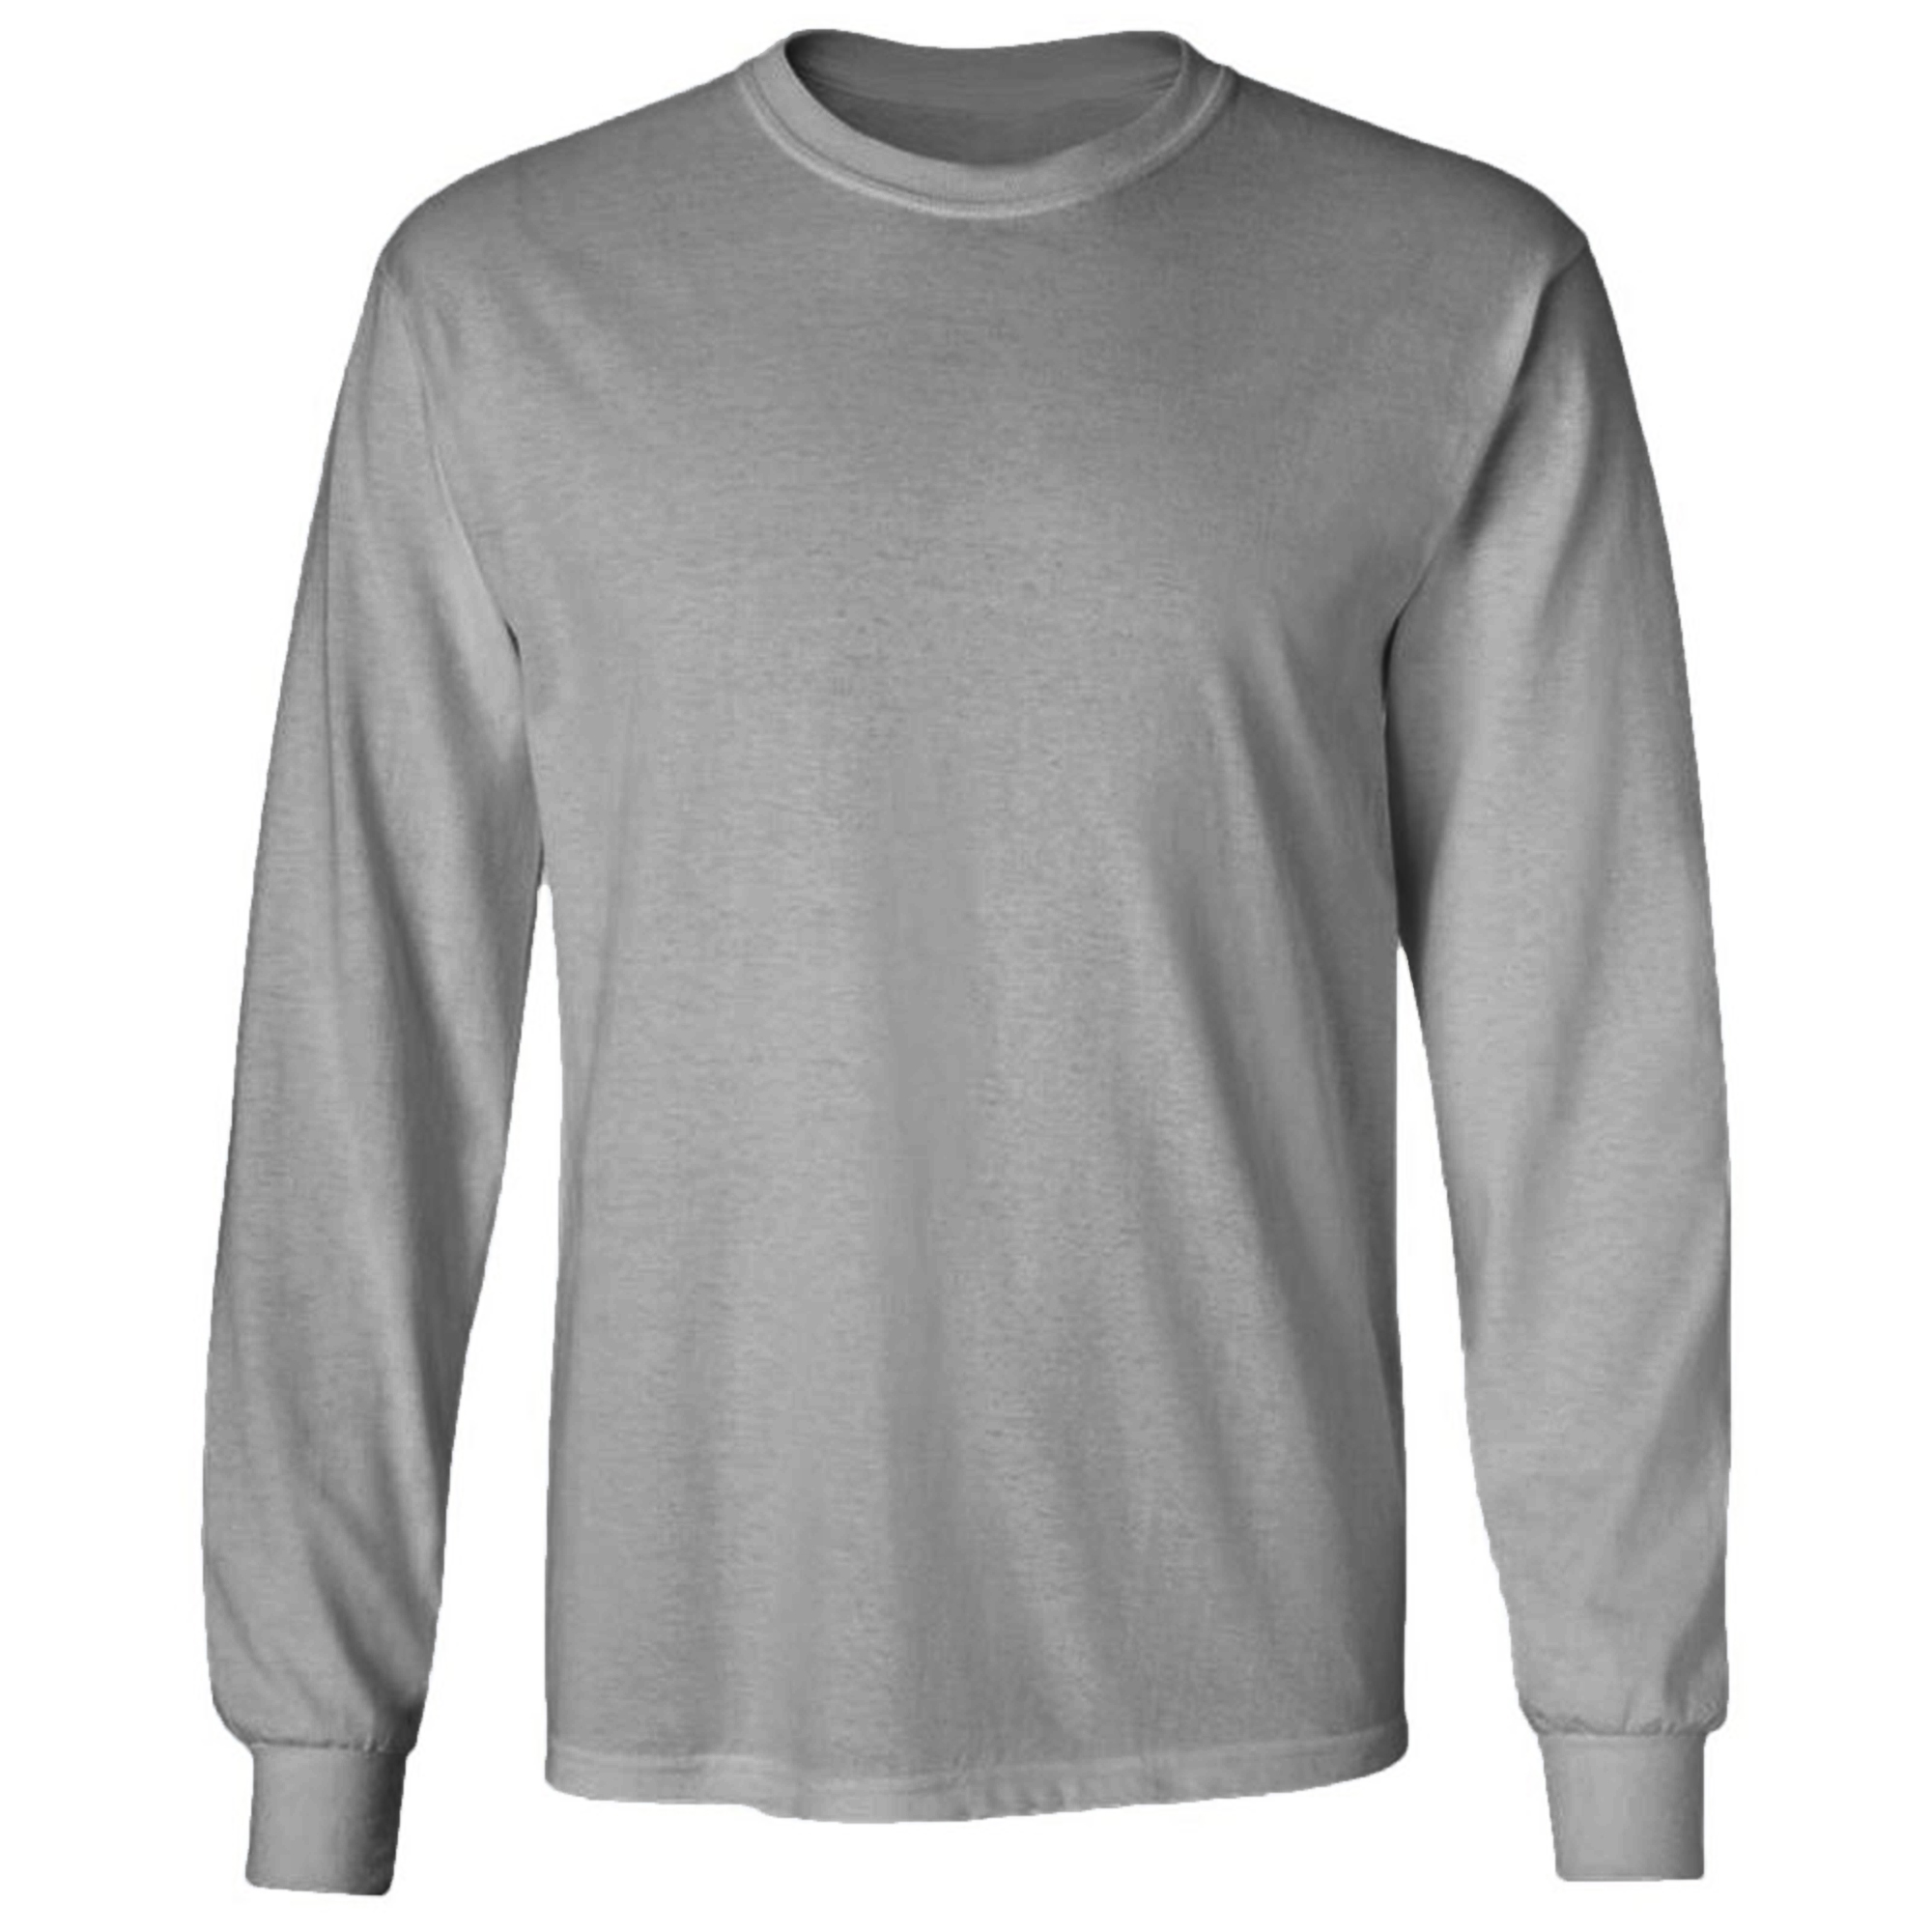 Best Long Sleeve T-Shirt Comfort and Fashion